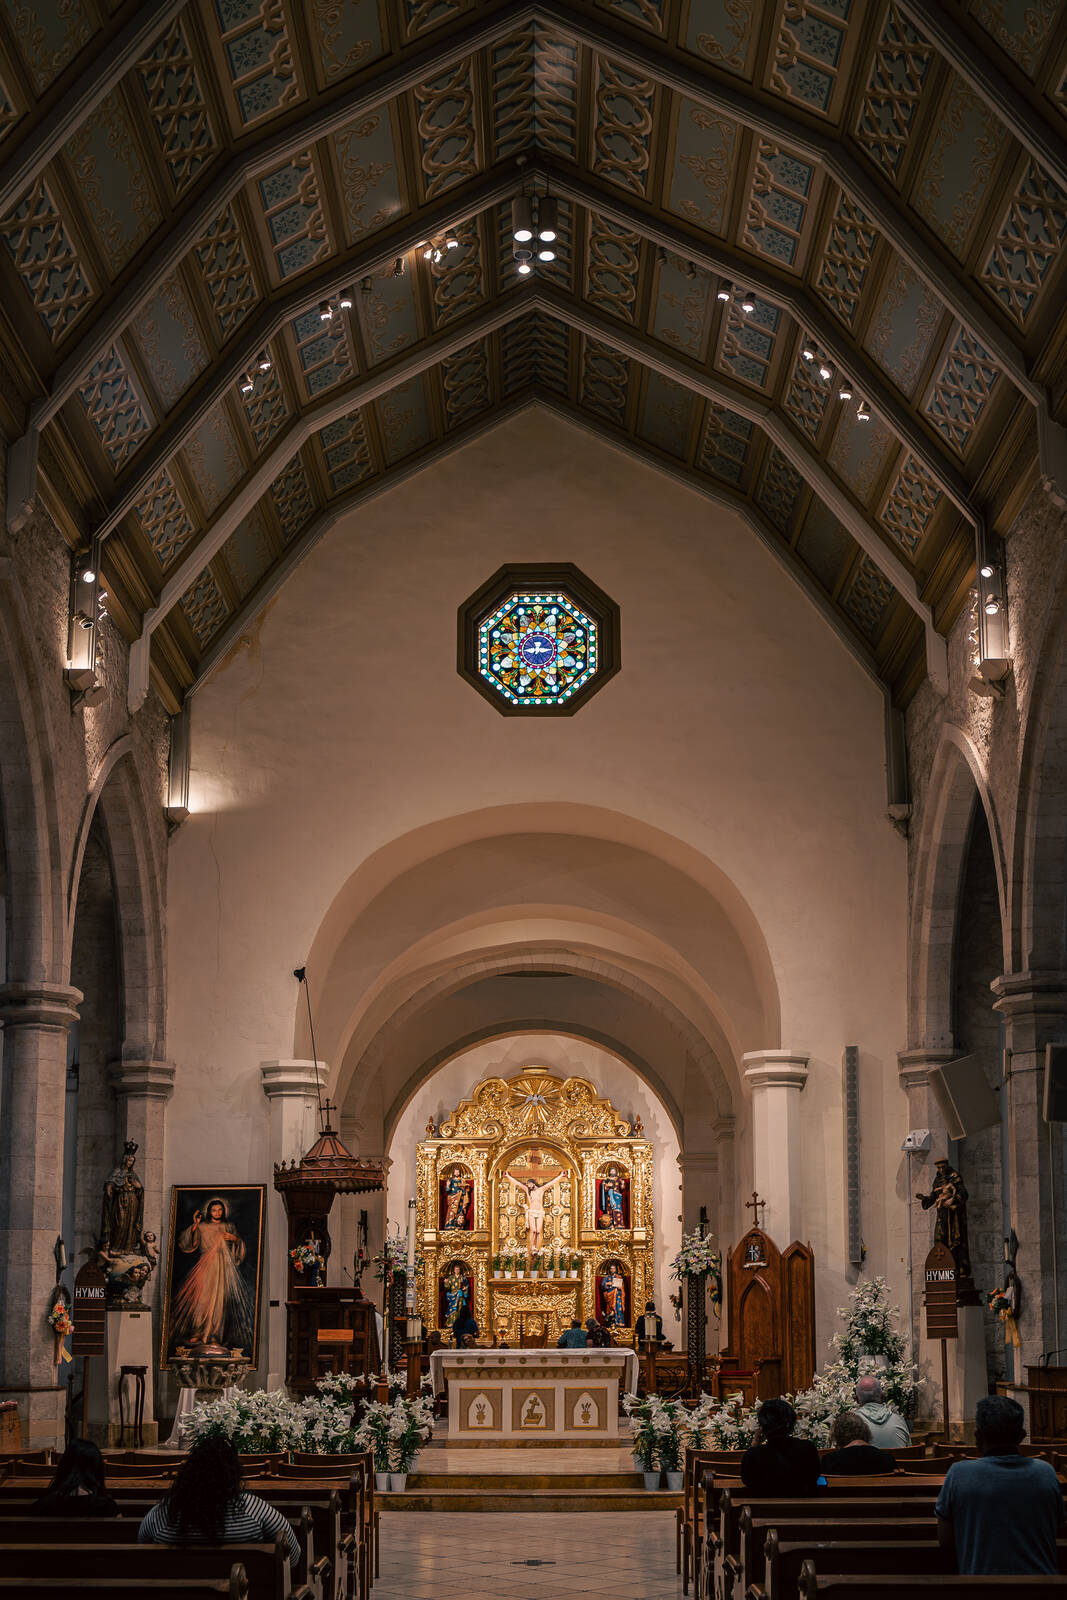 Image of San Fernando Cathedral by James Billings.